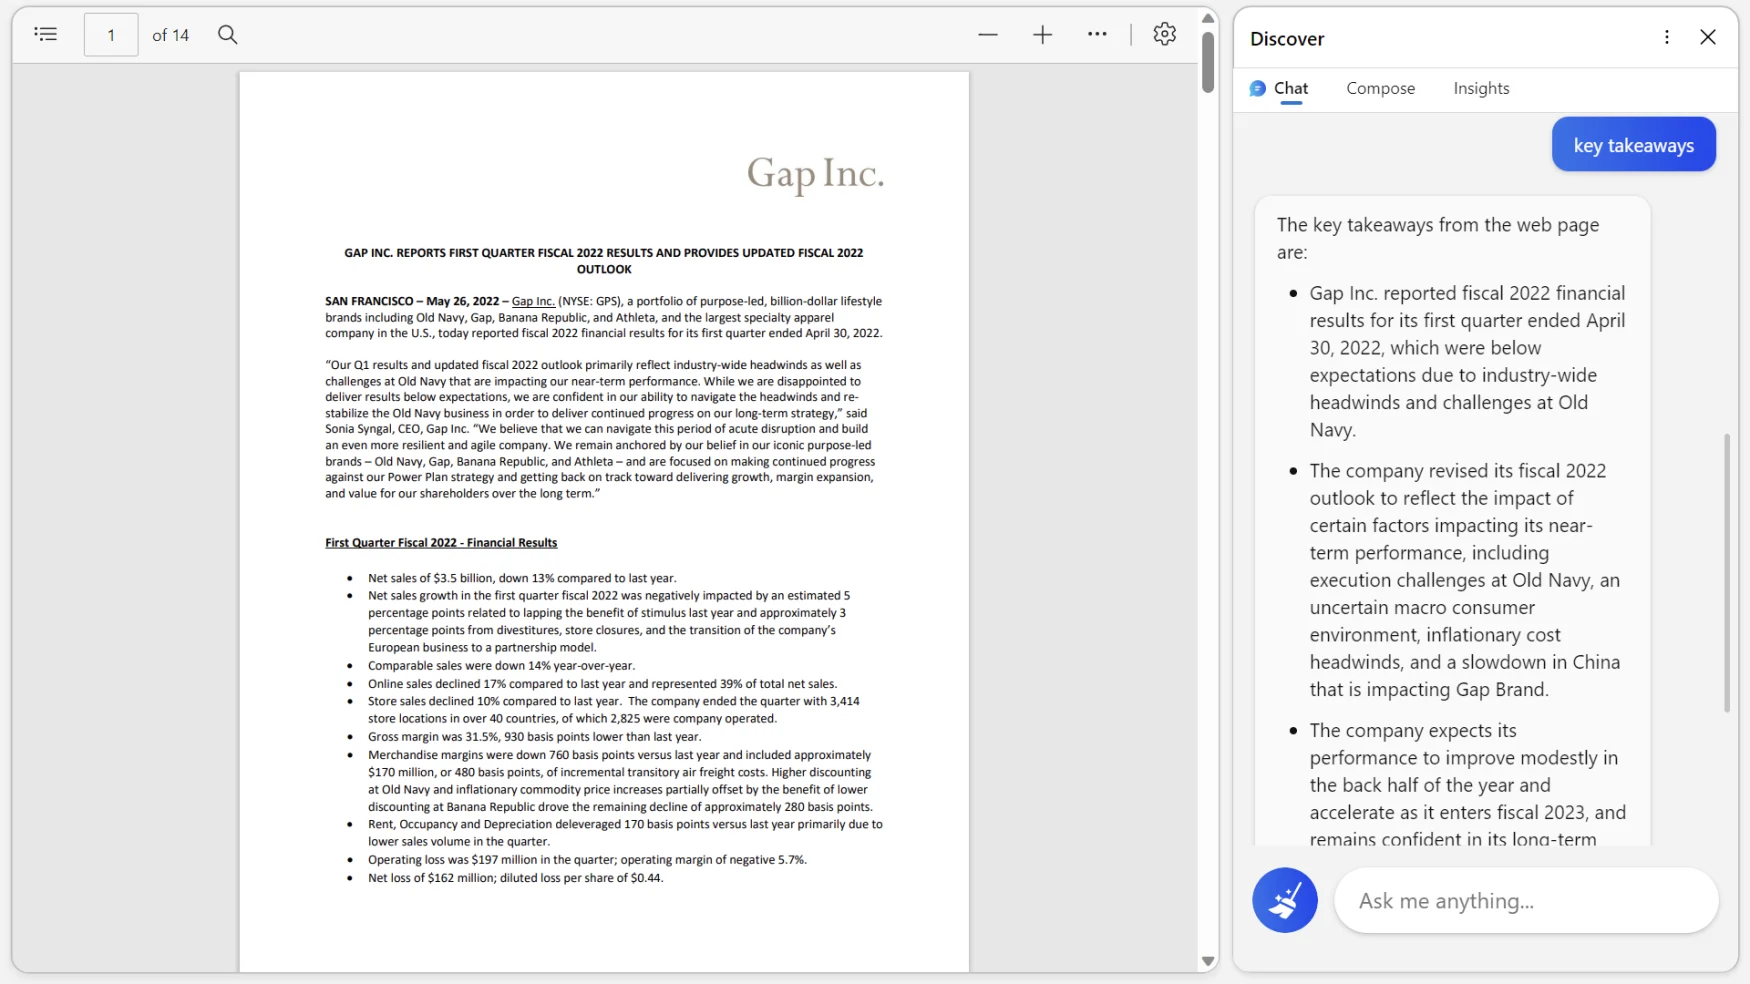 A screenshot of the Edge browser showing Gap Inc's quarterly report on the left pane and a Discover column on the right. In the right section, a conversation shows the first chatter saying 